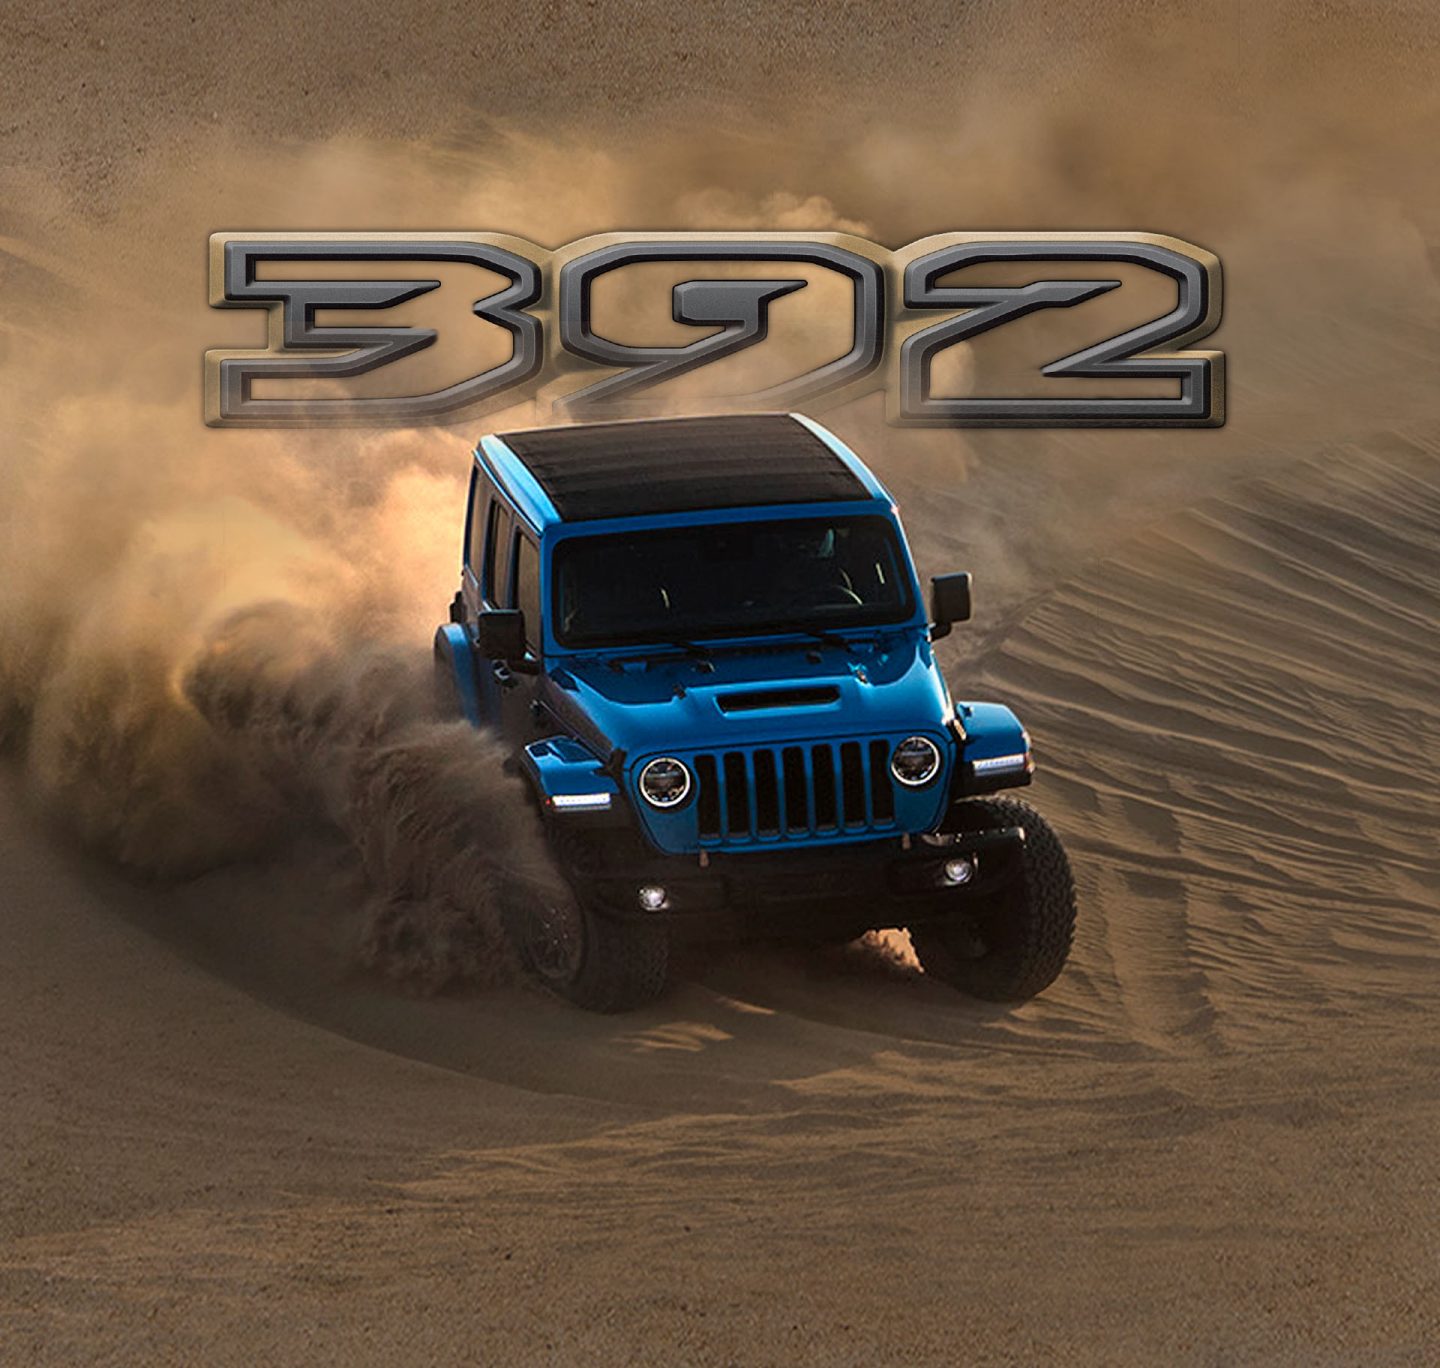 The 392 logo positioned above the 2022 Jeep Wrangler 392 decending a sandy hill as it kicks up dust.